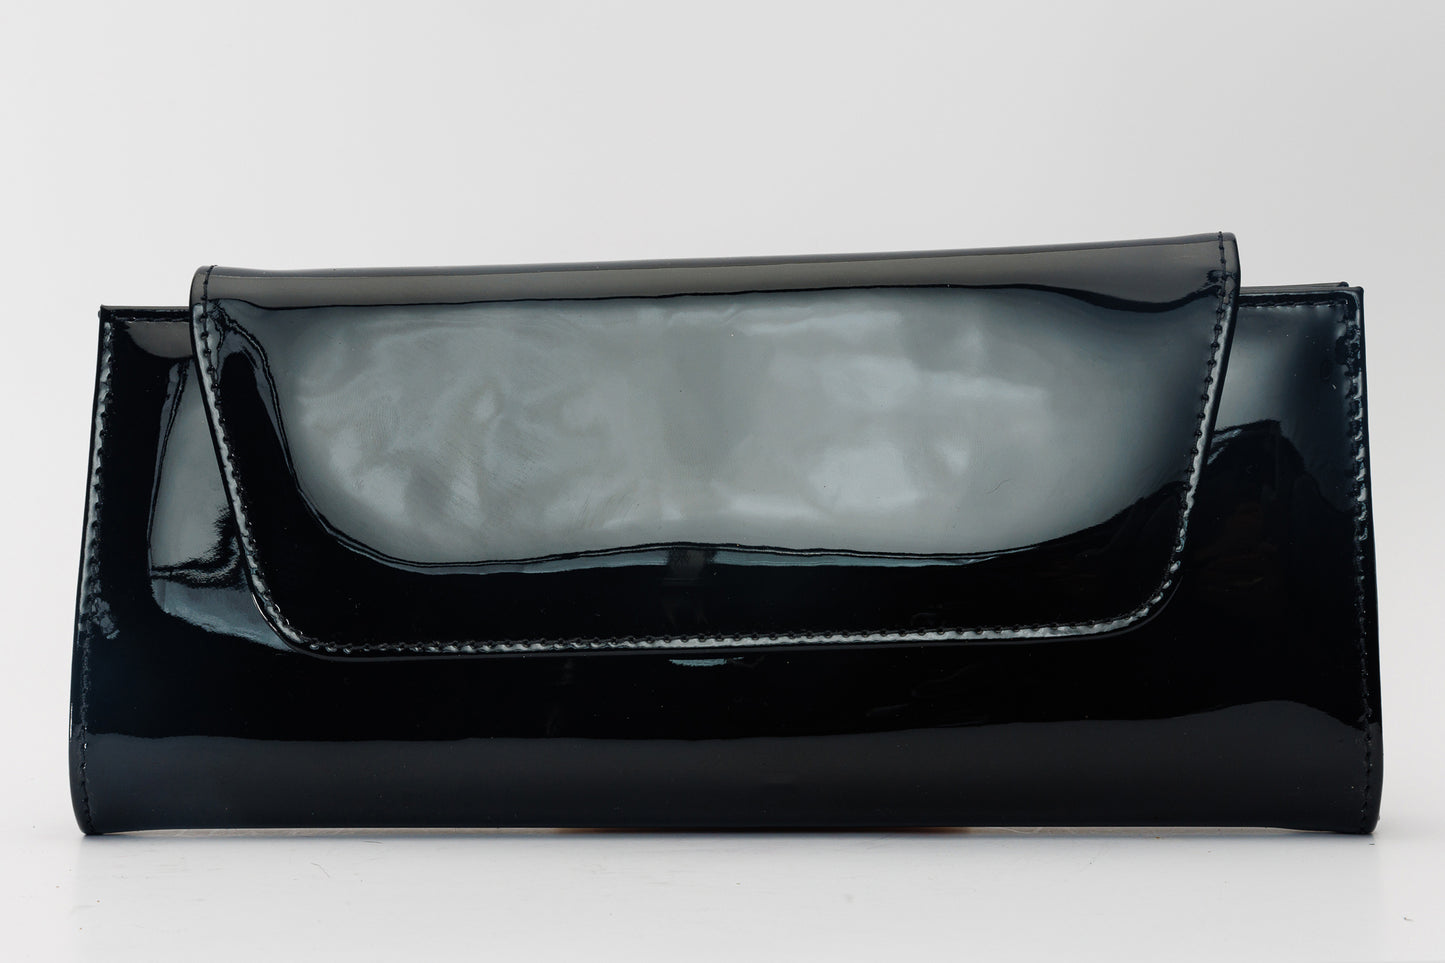 The Ege Black Patent Leather Clutch